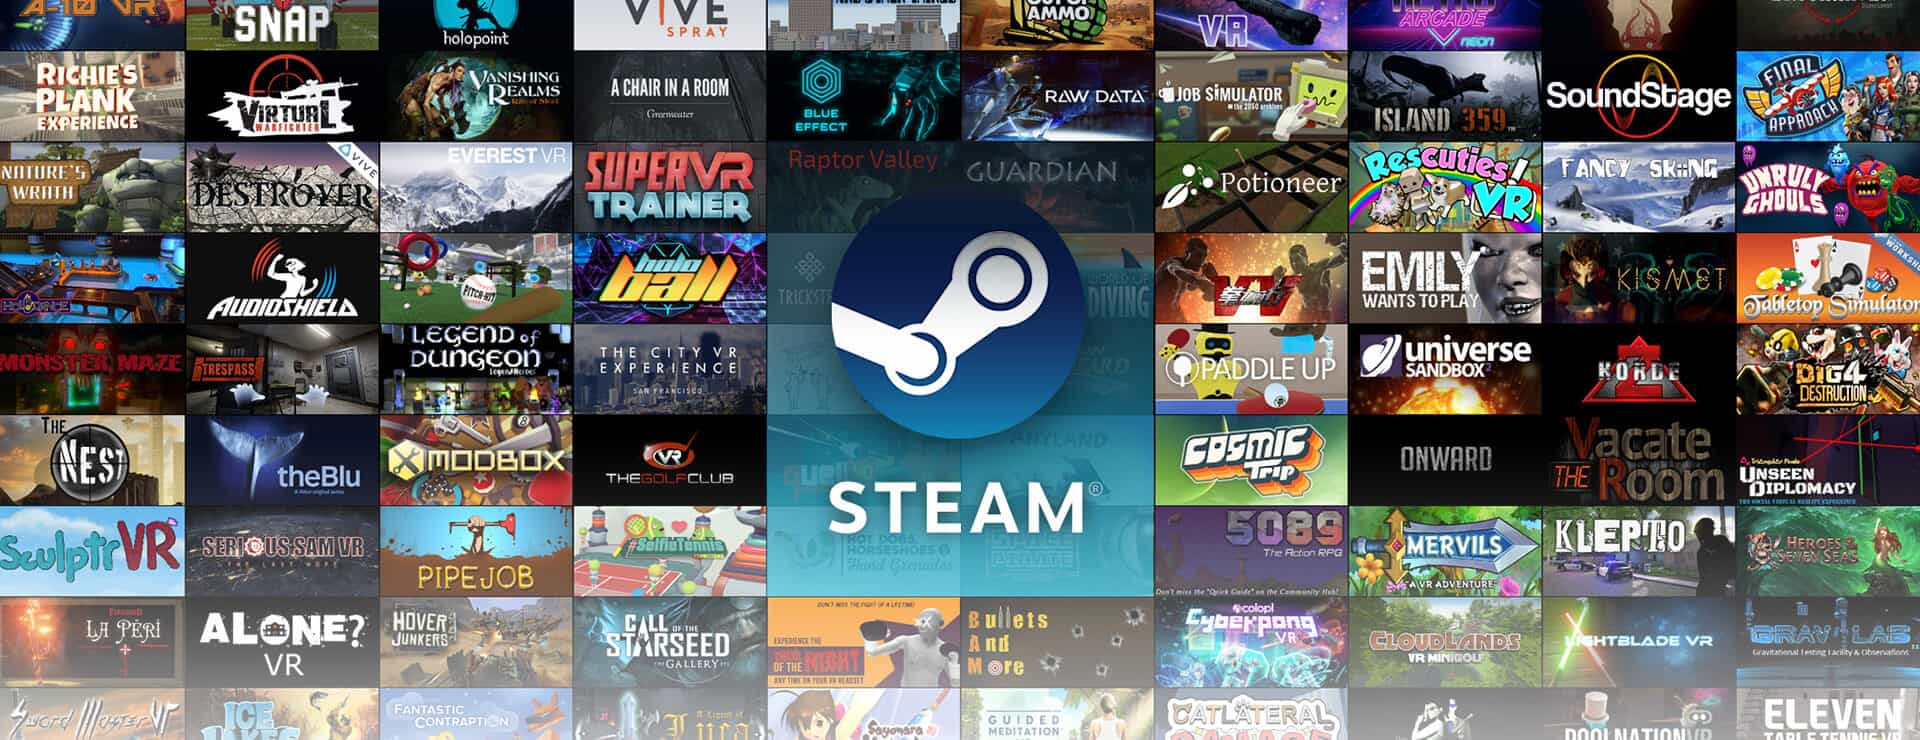 SteamVR exits early access on Windows Mixed Reality - OnMSFT.com - May 1, 2018